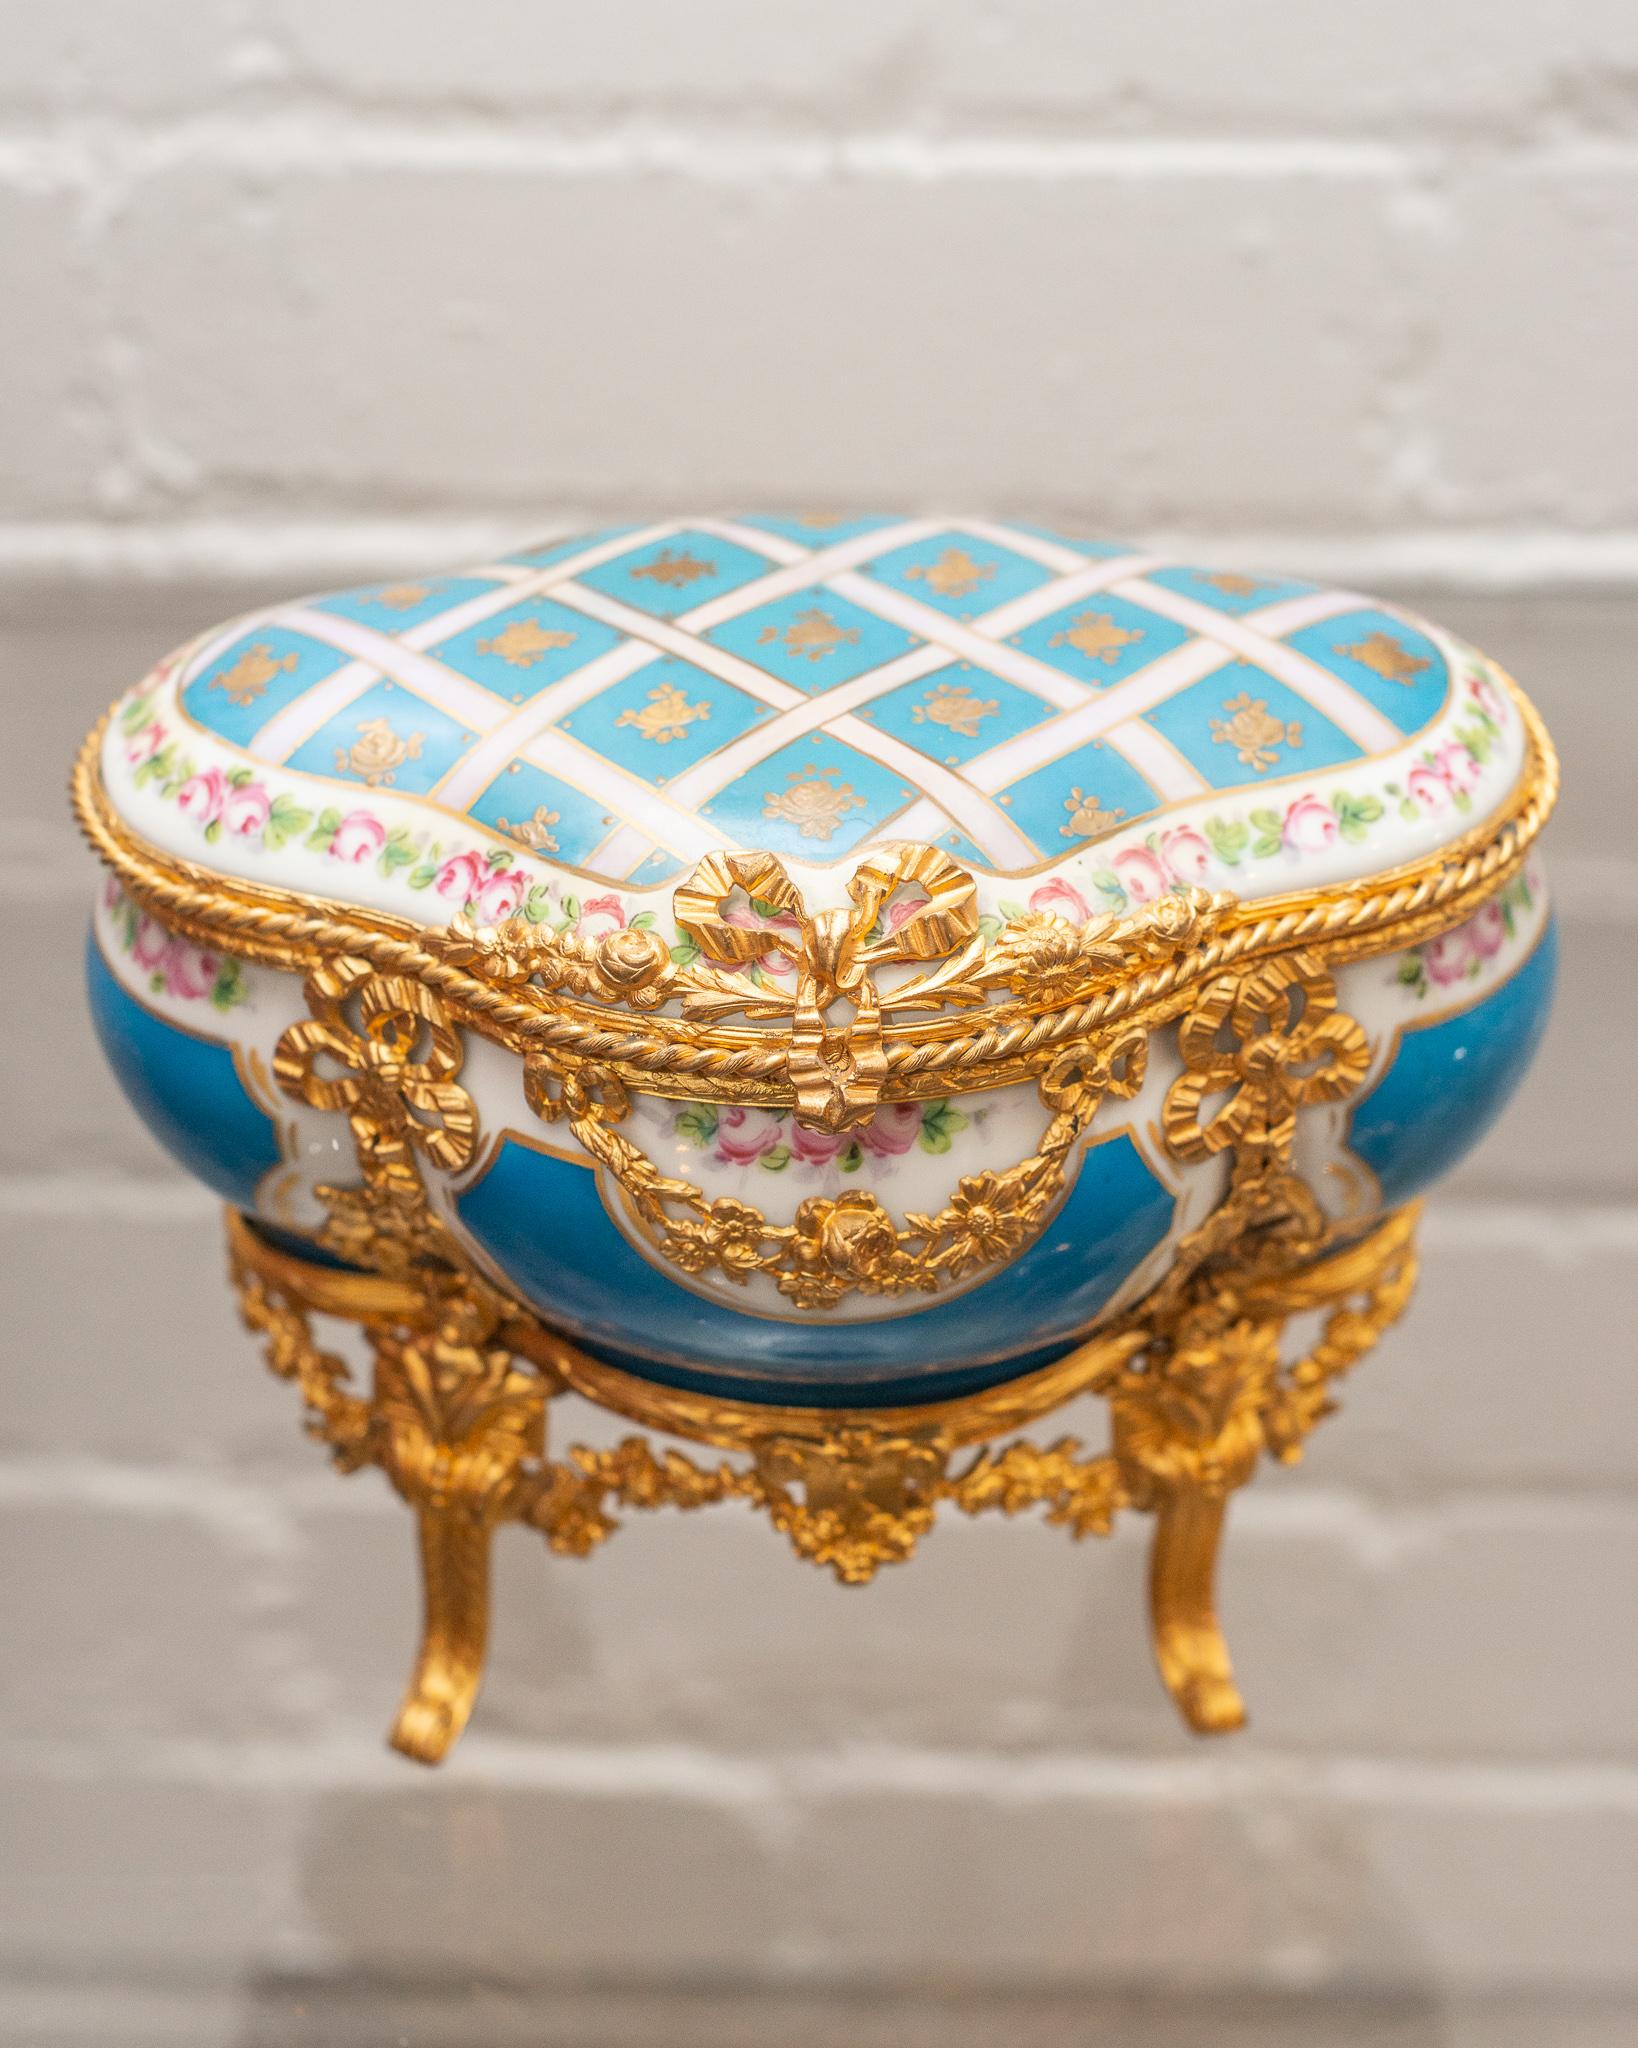 A stunning and ornate Sévres Bleu Celeste jewelry casket with gold ormolu details. Delicately hand painted with flowers, this iconic style of Sévres is timeless and decadent. Bears the crossed sword Sévres marking as well as 